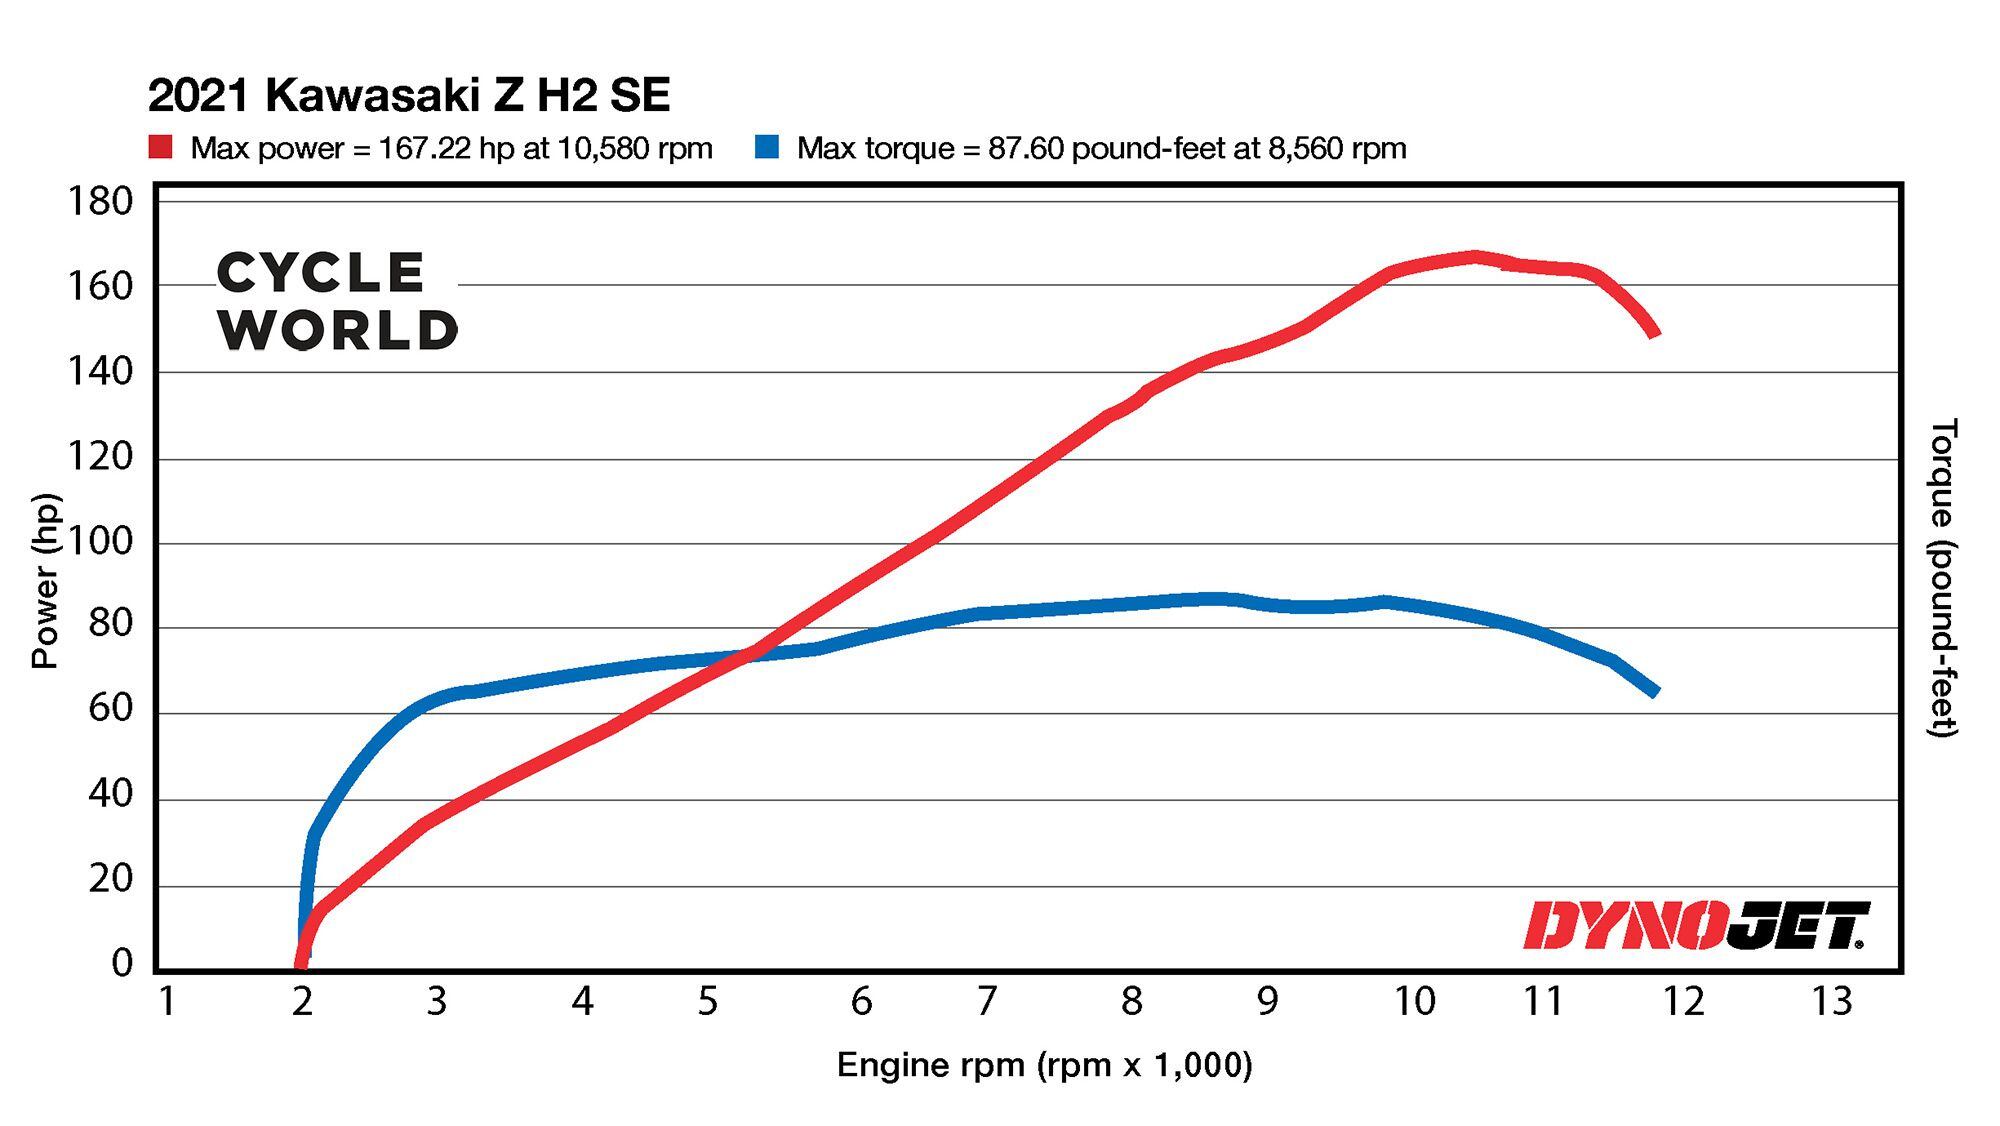 On the <i>Cycle World</i> dyno the 2021 Z H2 SE put out 167.2 hp to its 190 rear tire.